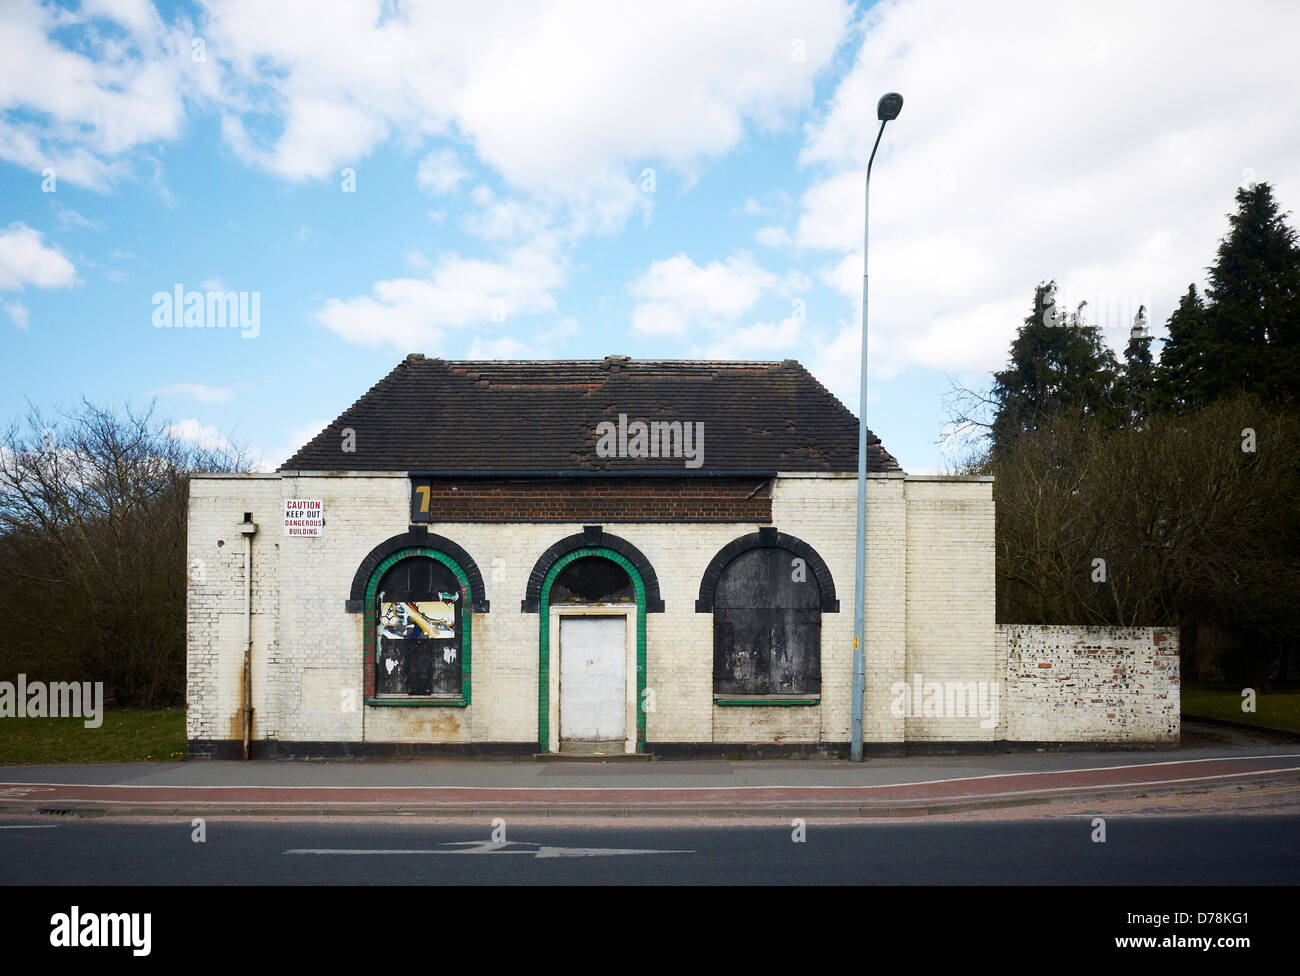 Closed down Fish and Chips shop in Winsford Cheshire UK. Demolished June 2013. Stock Photo